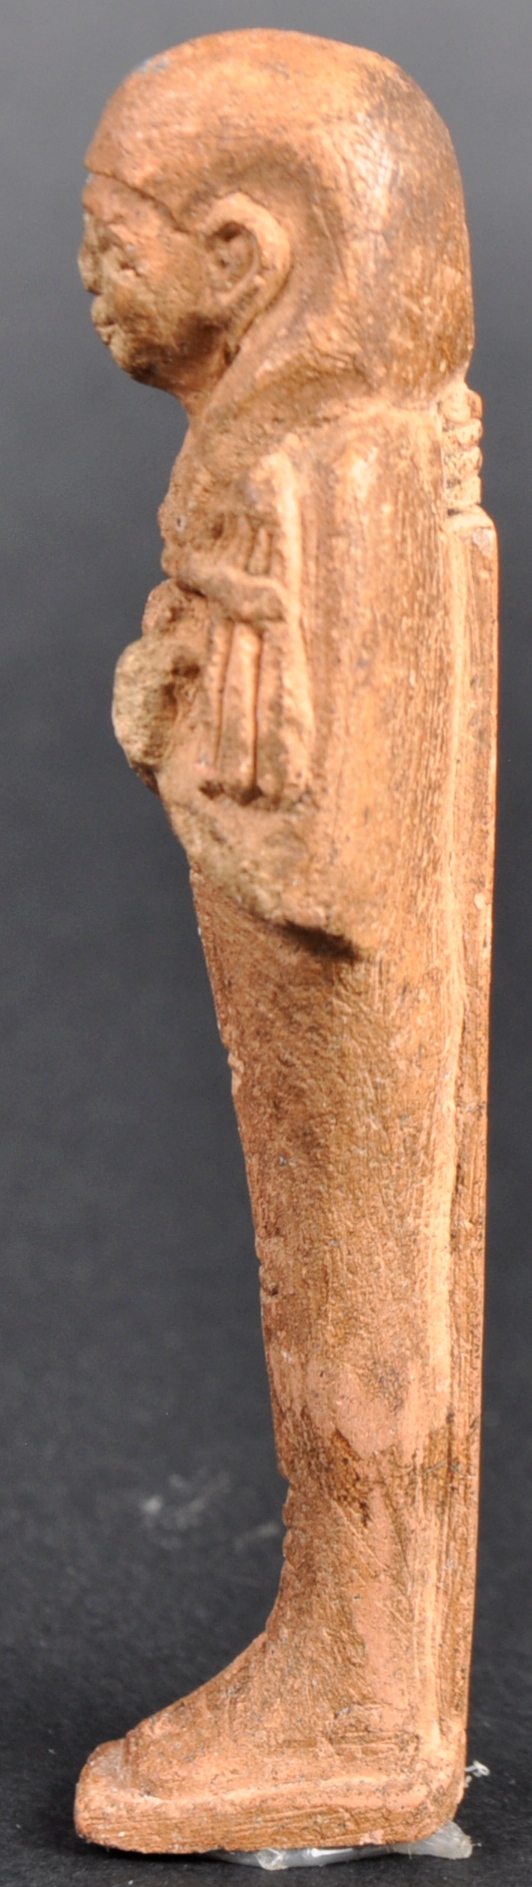 BELIEVED LATE PERIOD EGYPTIAN SHABTI FIGURE - Image 4 of 5